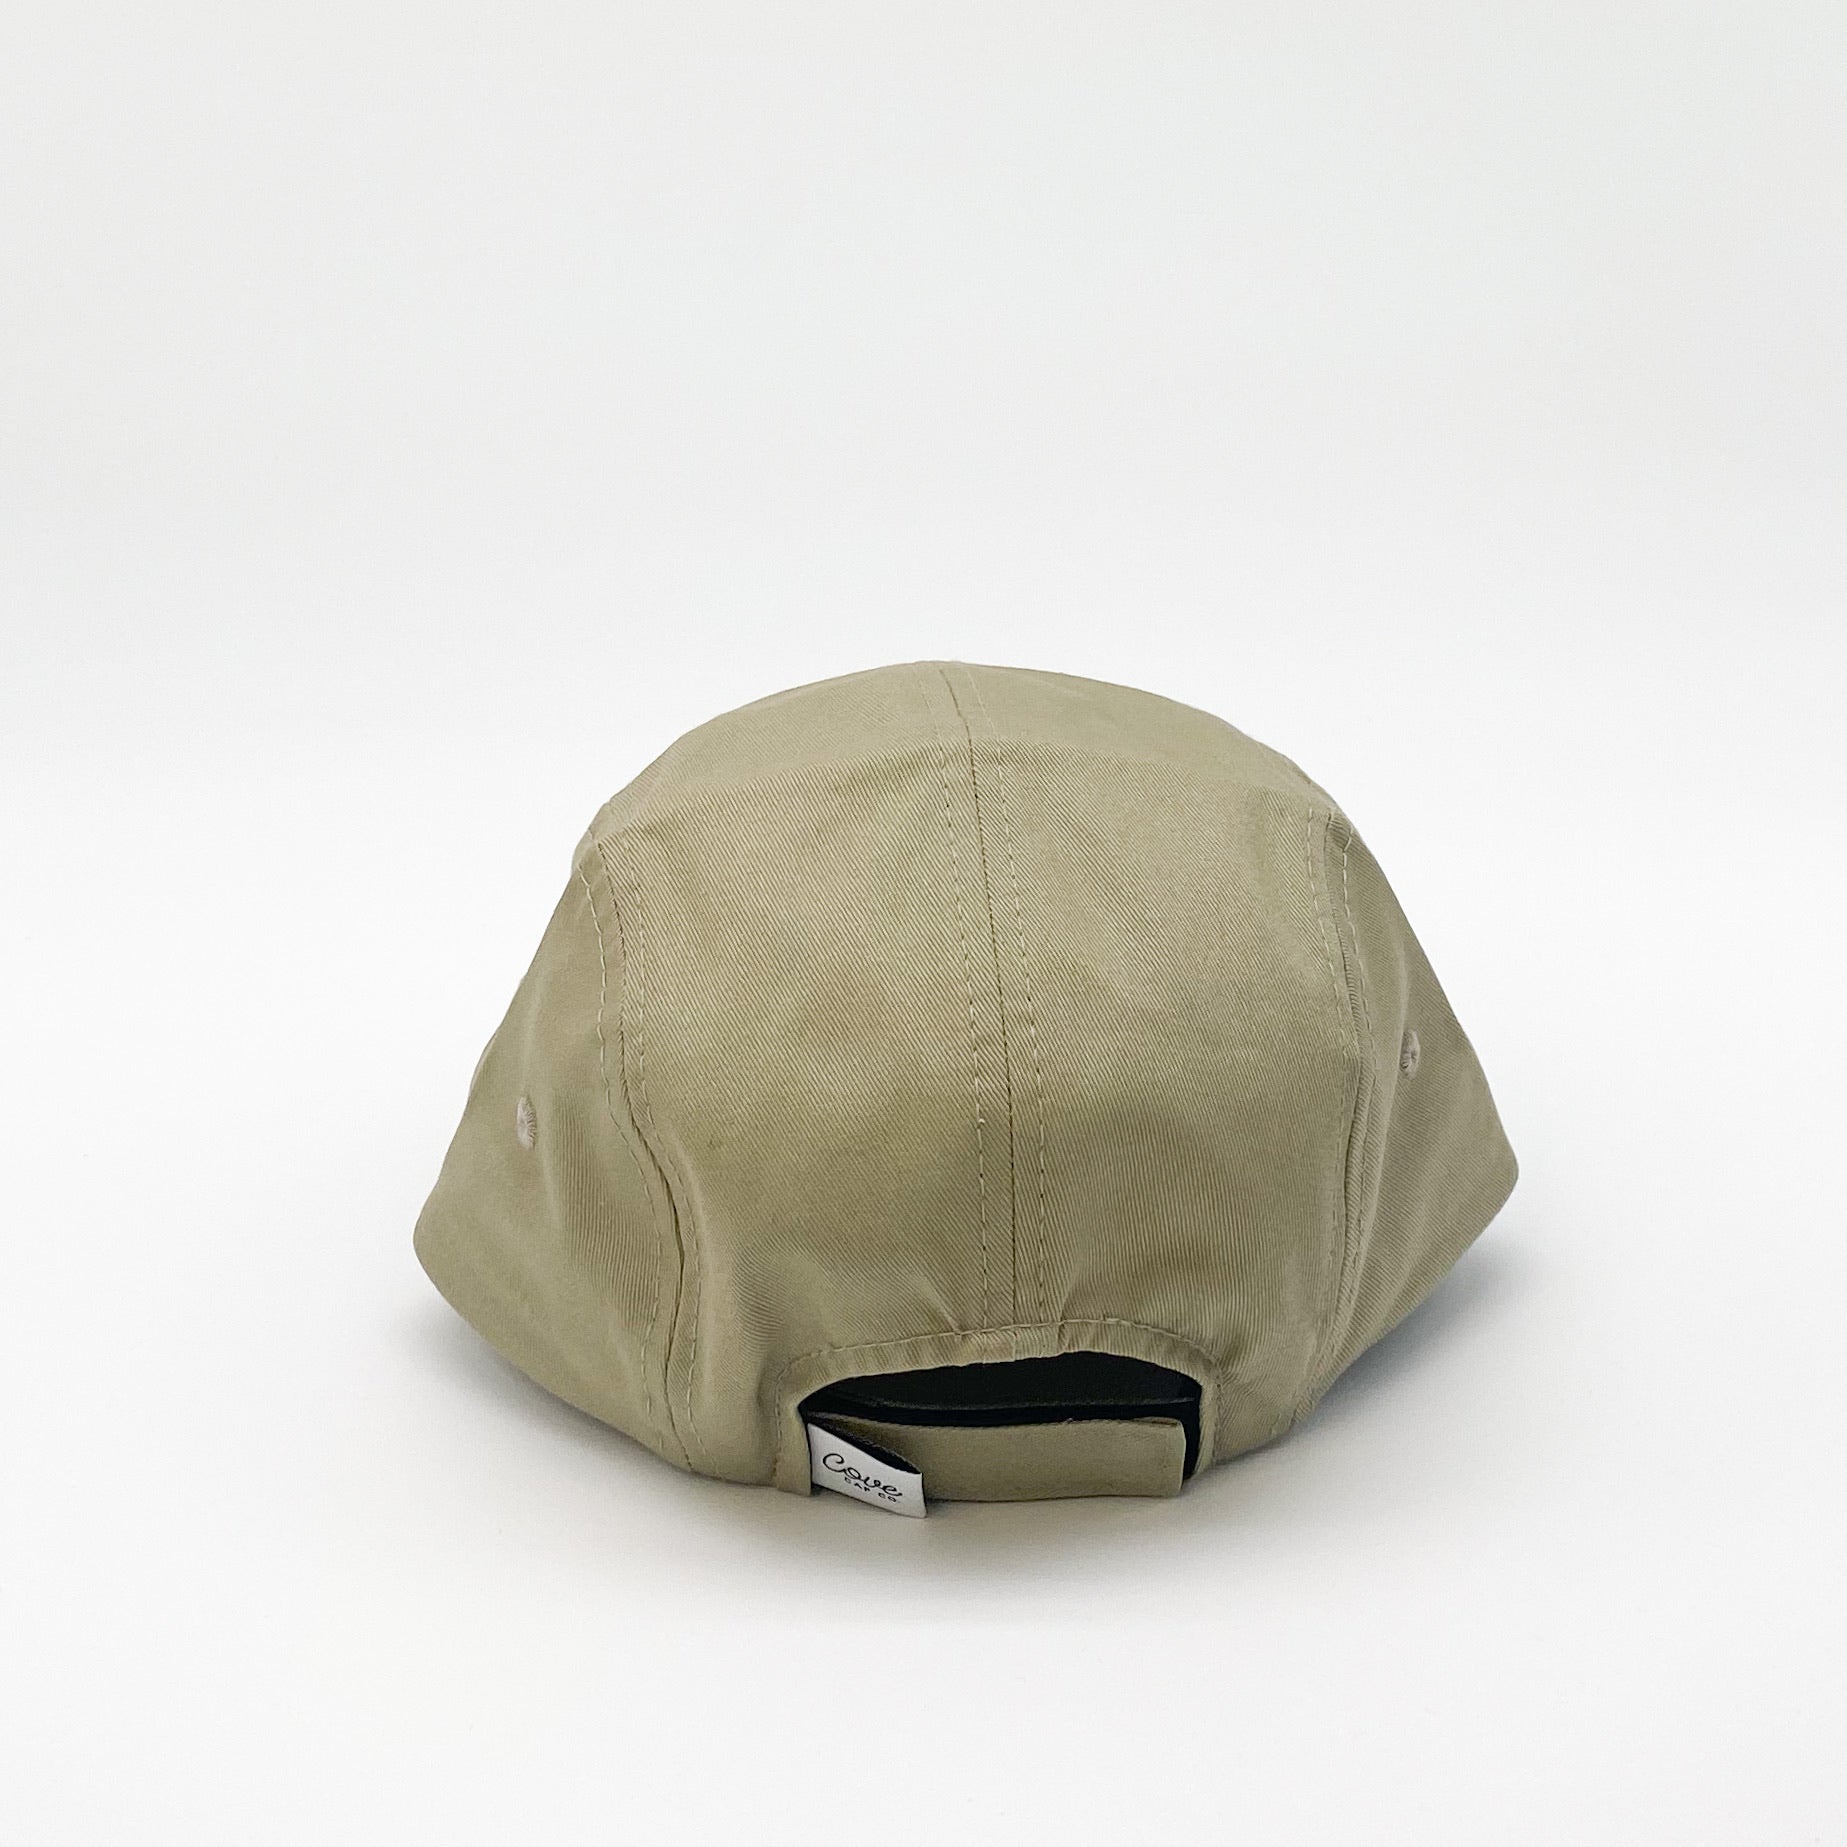 Khaki green kids hat. Minimalist five-panel design, made in Canada out of organic cotton. Hat has an adjustable soft velcro closure.